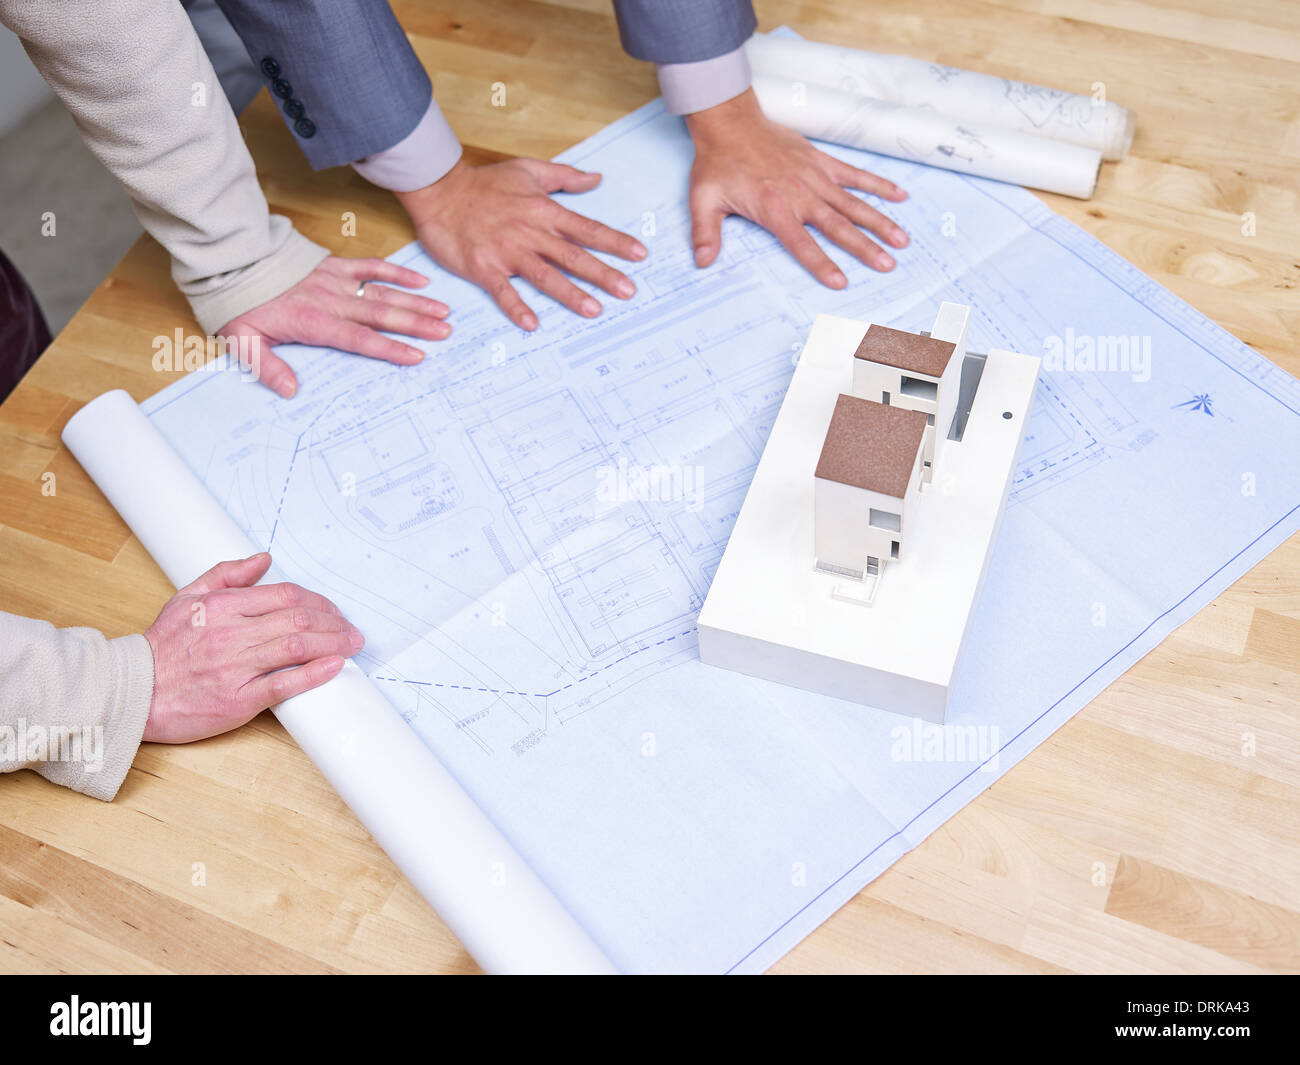 business people reviewing blueprint Stock Photo